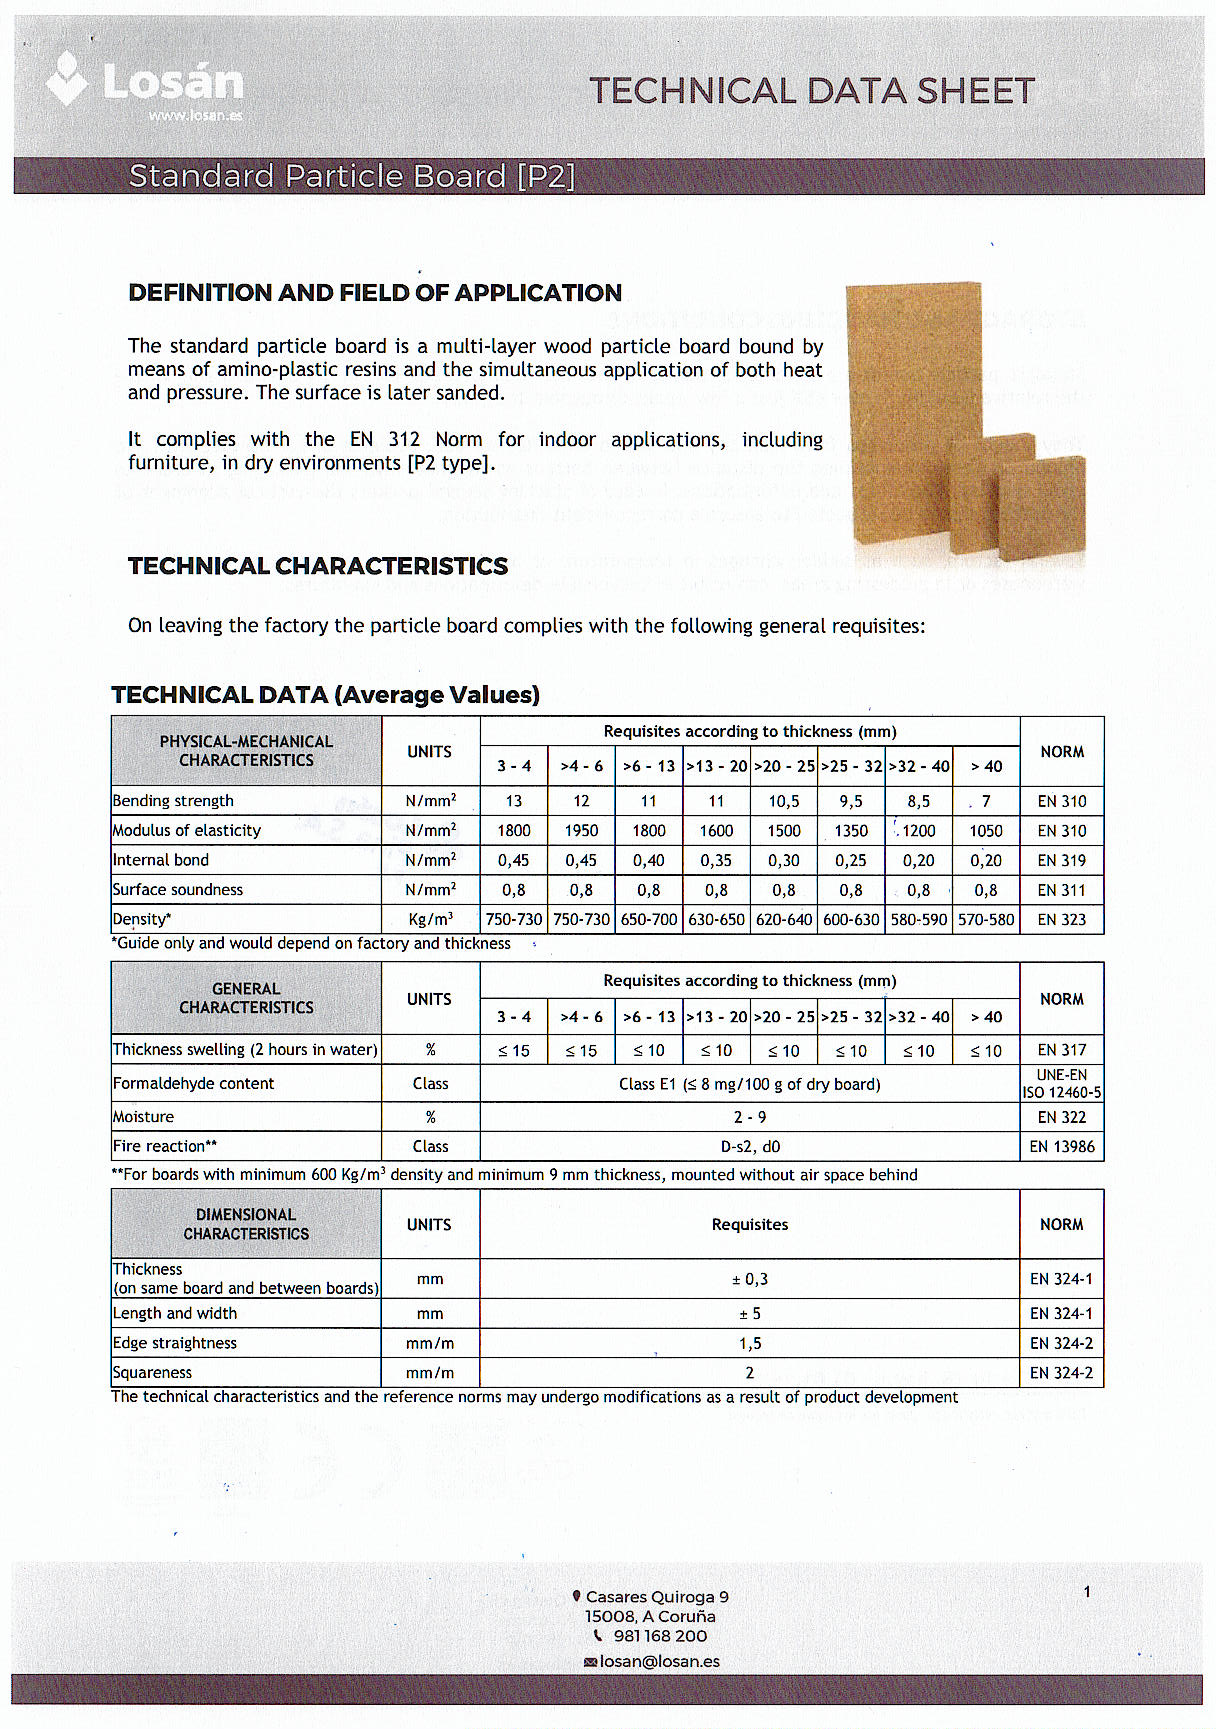 Data Sheet (Spanish Particle Board P2 Type)_Page_1